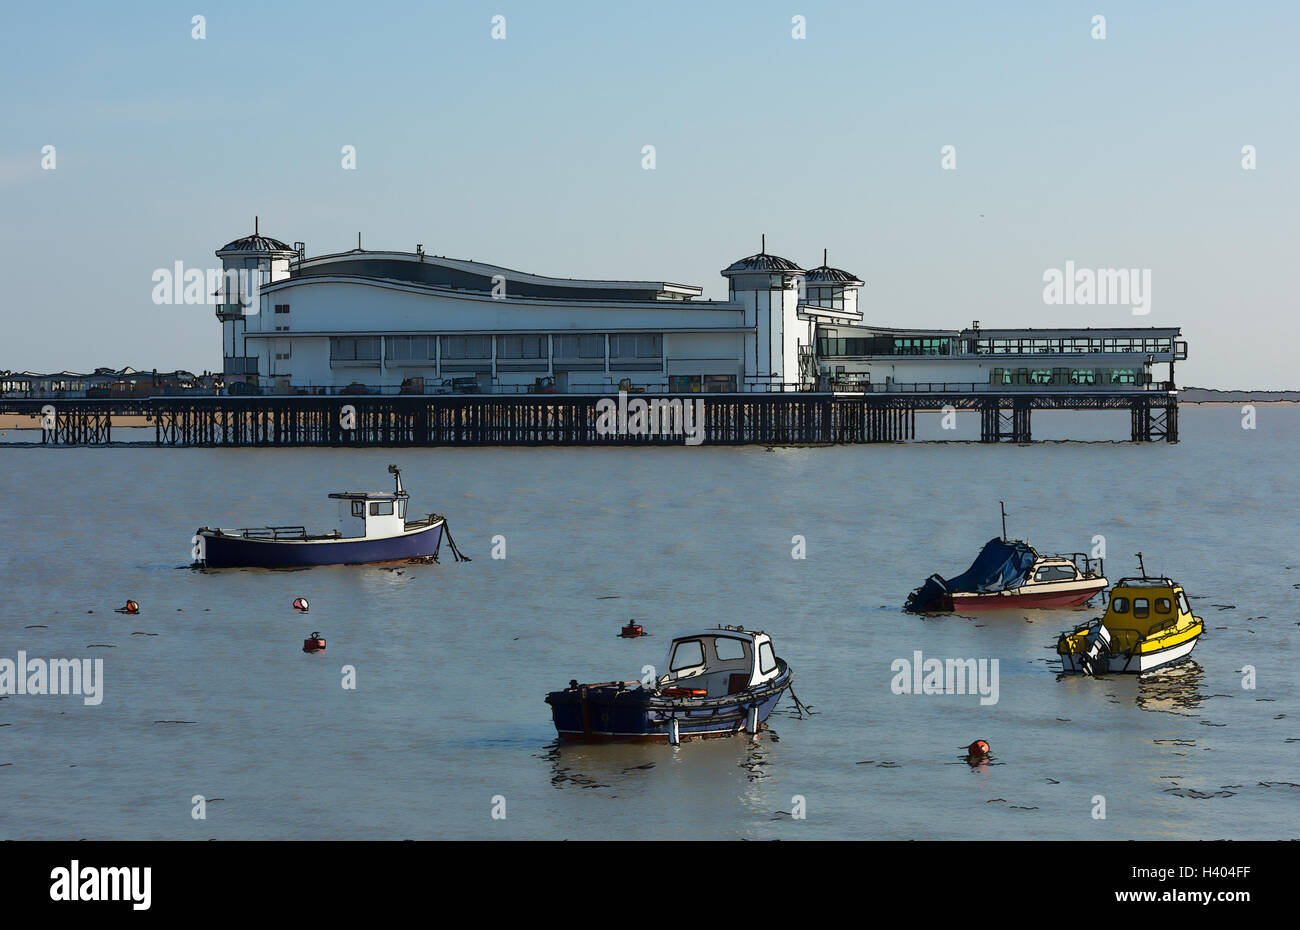 Weston-super-mare Somerset boats and the Grand Pier in popular tourist town illustration Stock Photo